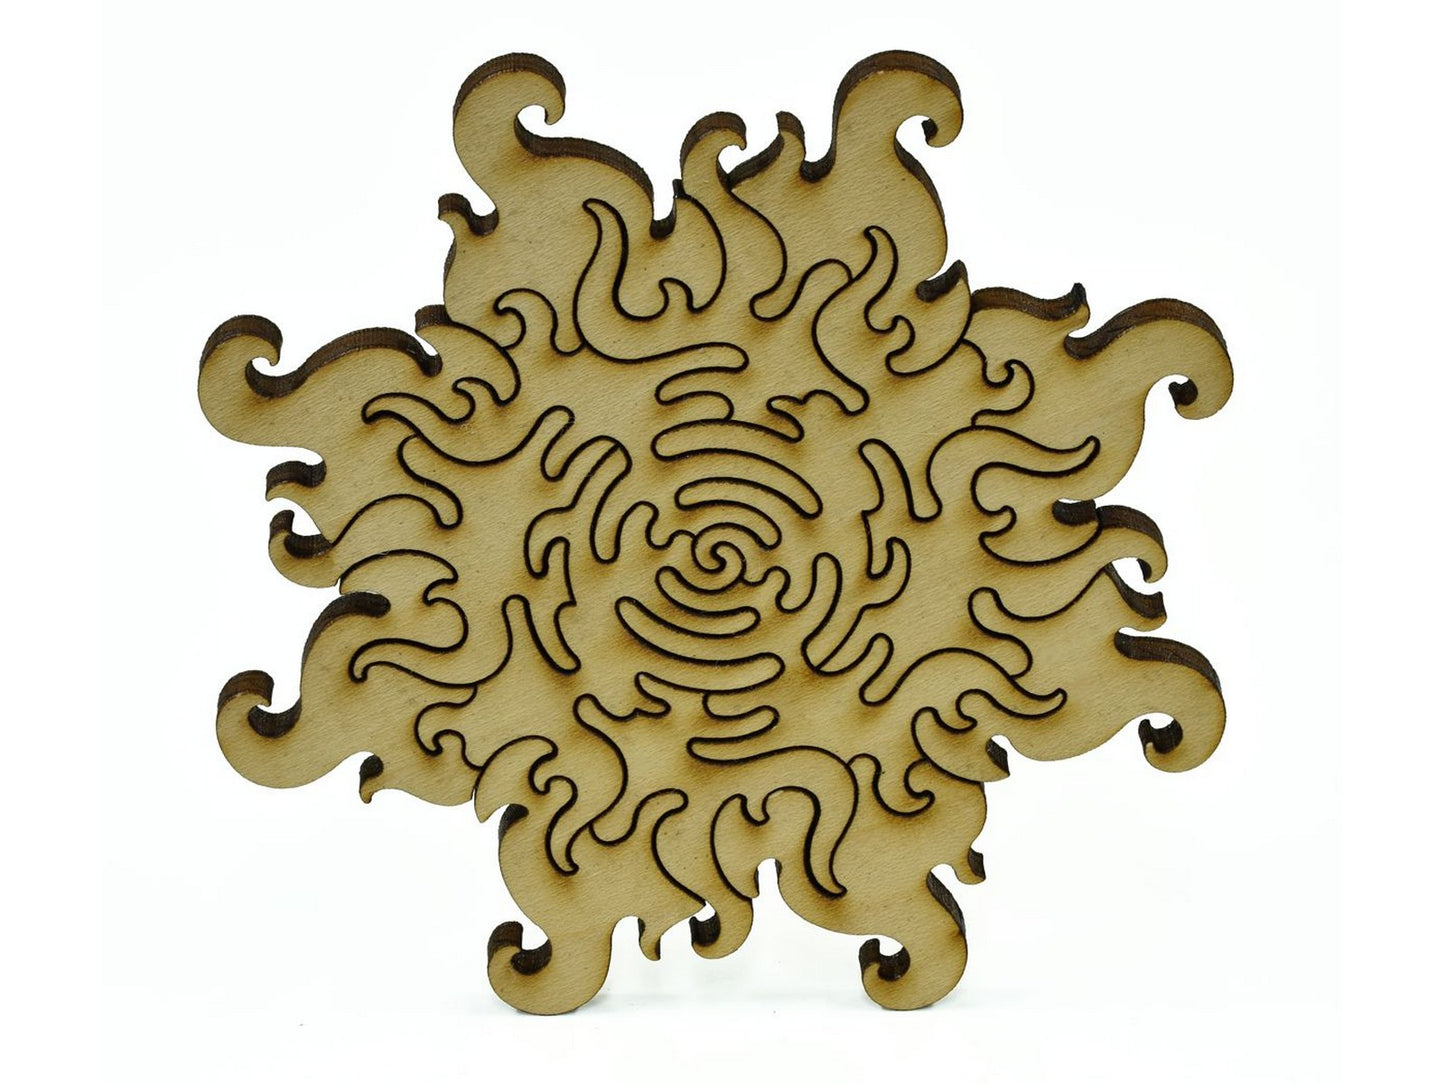 A closeup of pieces in the shape of a sun.